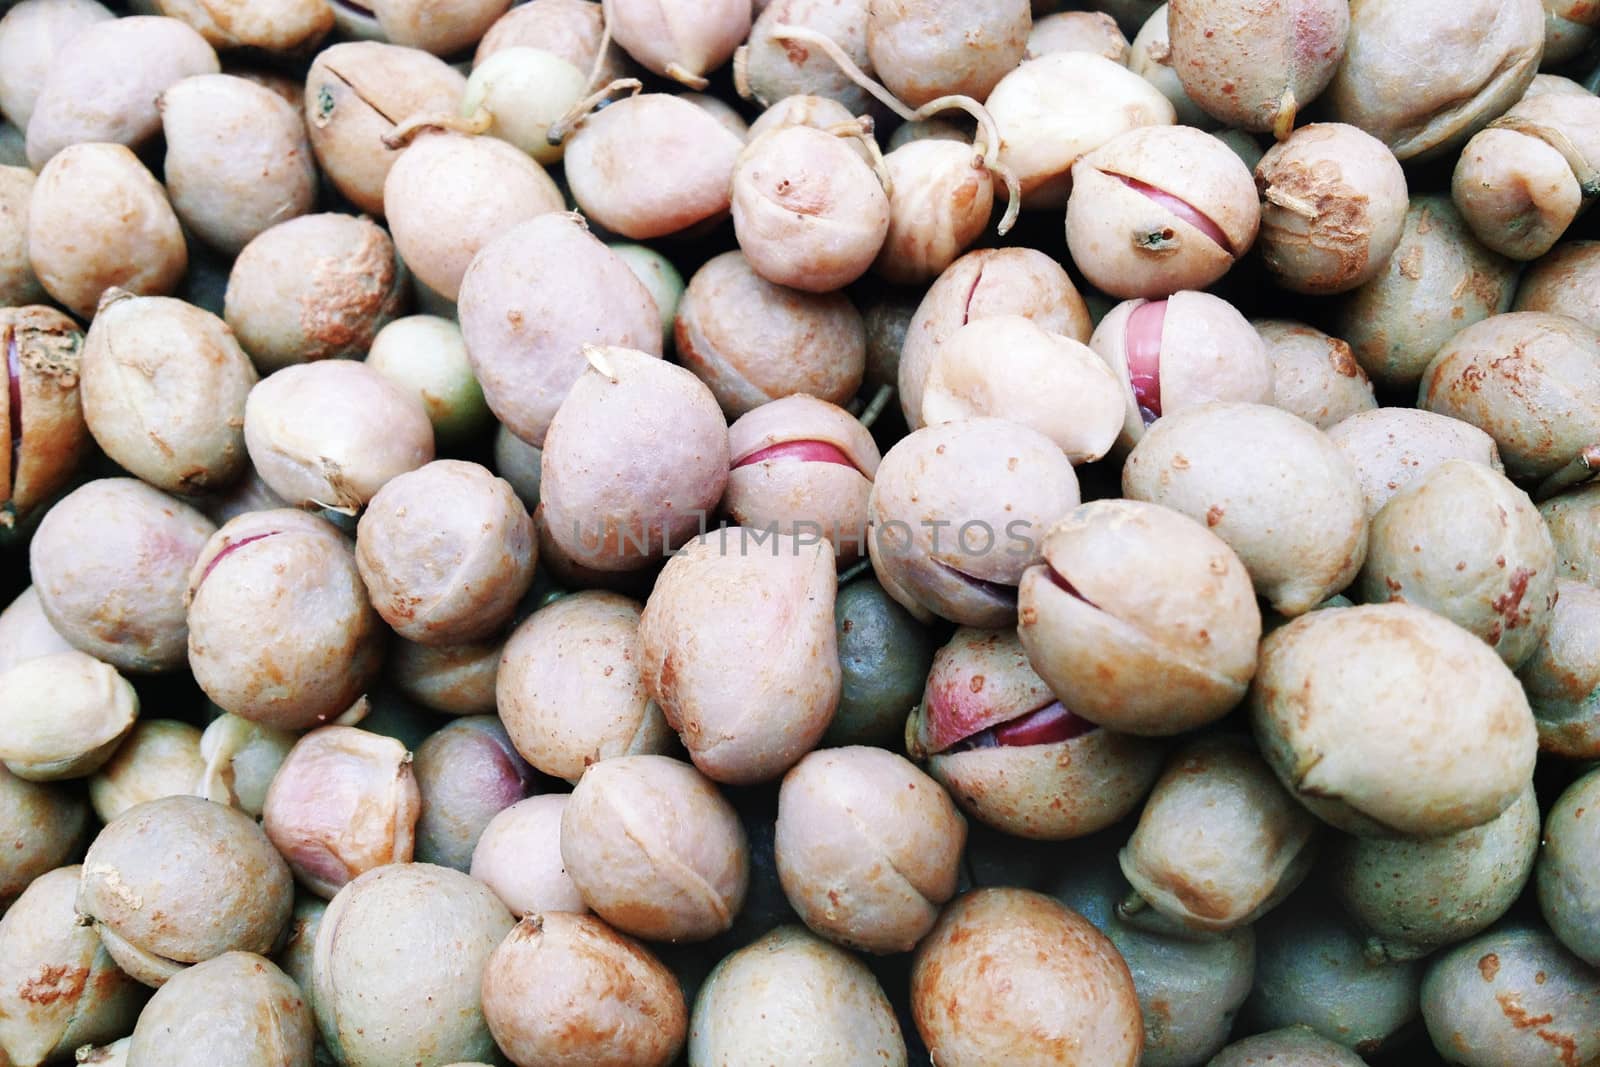 Boiled Bambara Groundnut, a kind of Thai sweetmeat, is a popular form of street food in Thailand